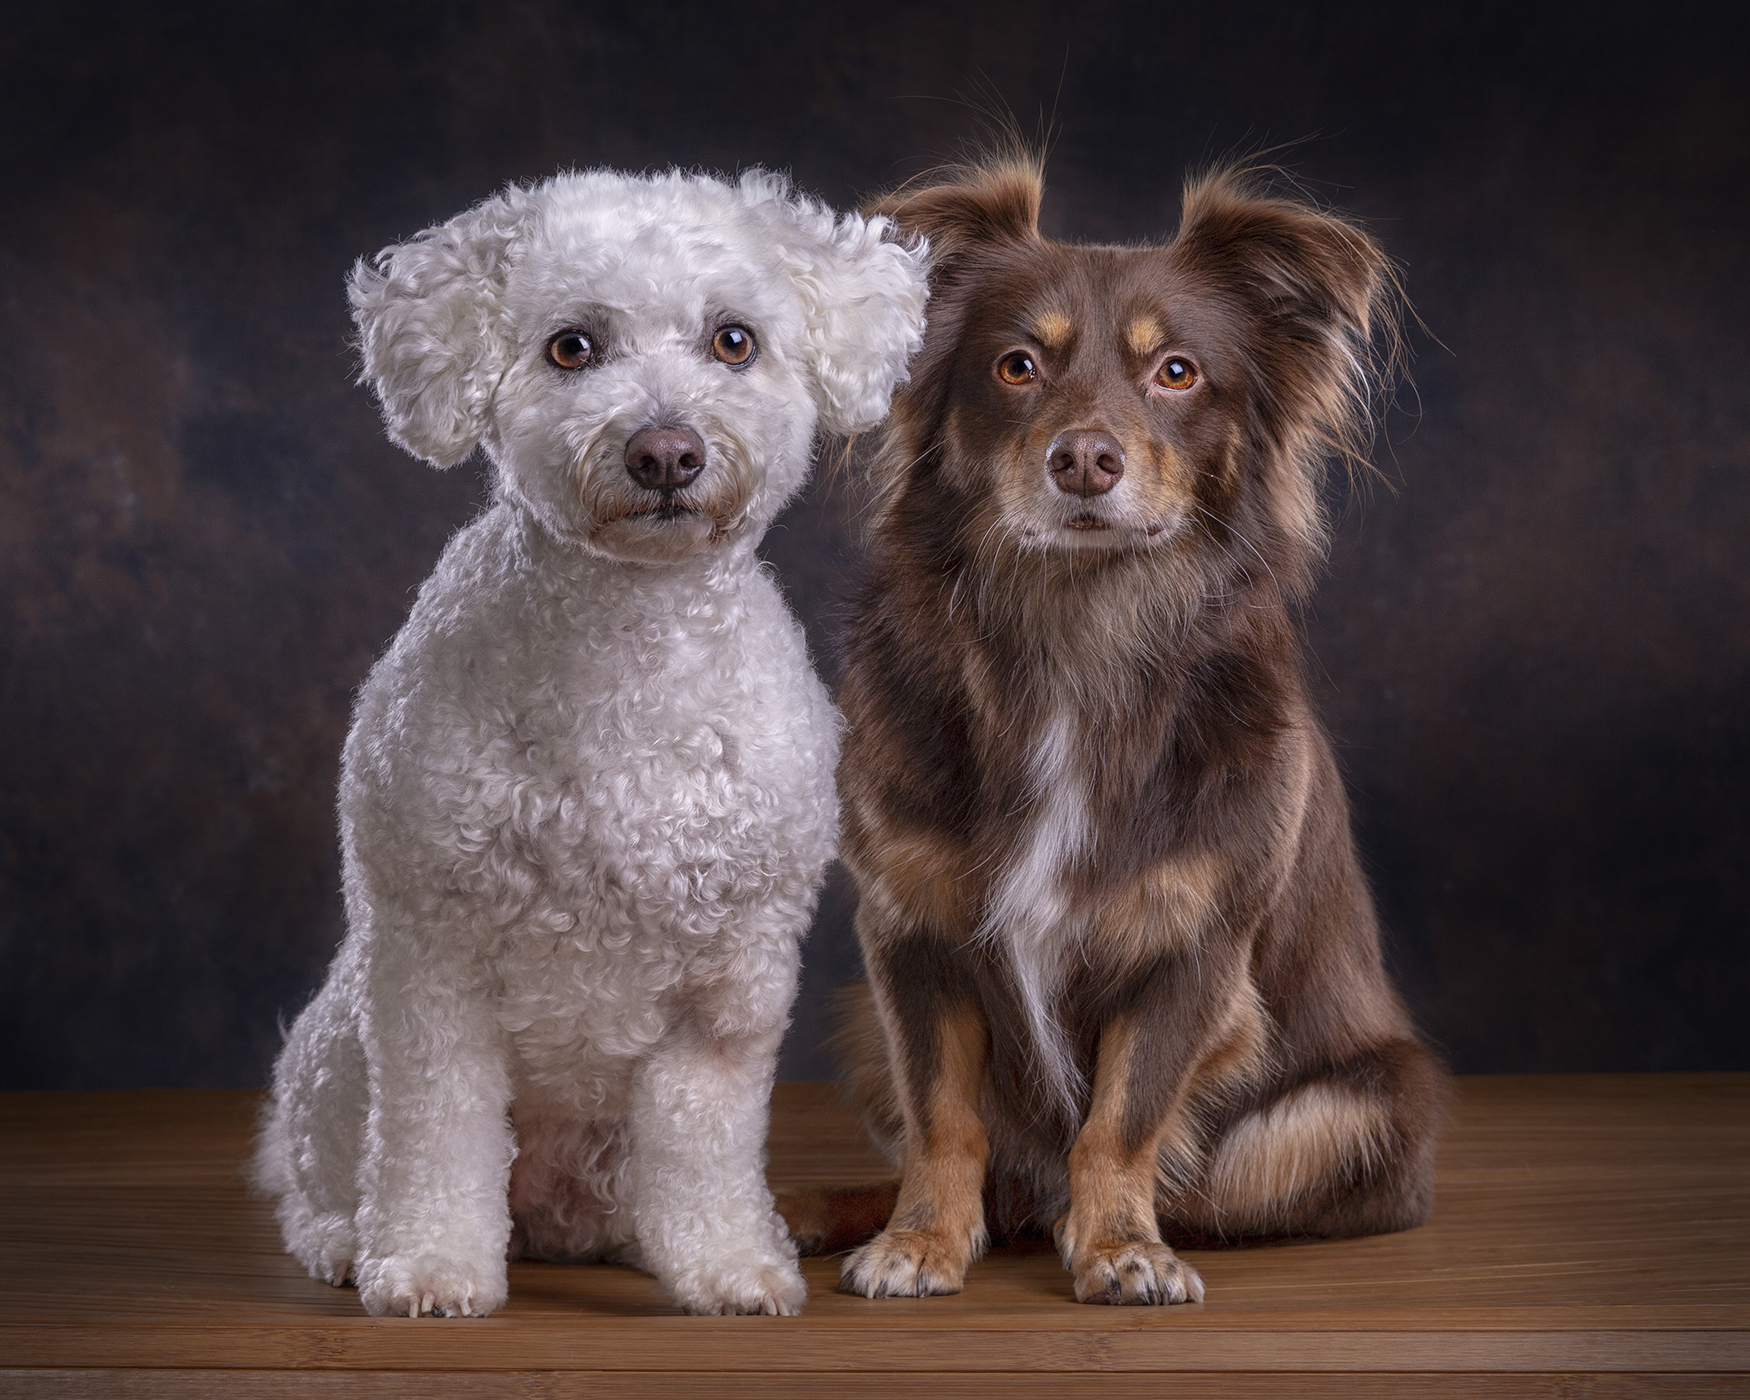 Dog Photographer in London - serving clients across the UK